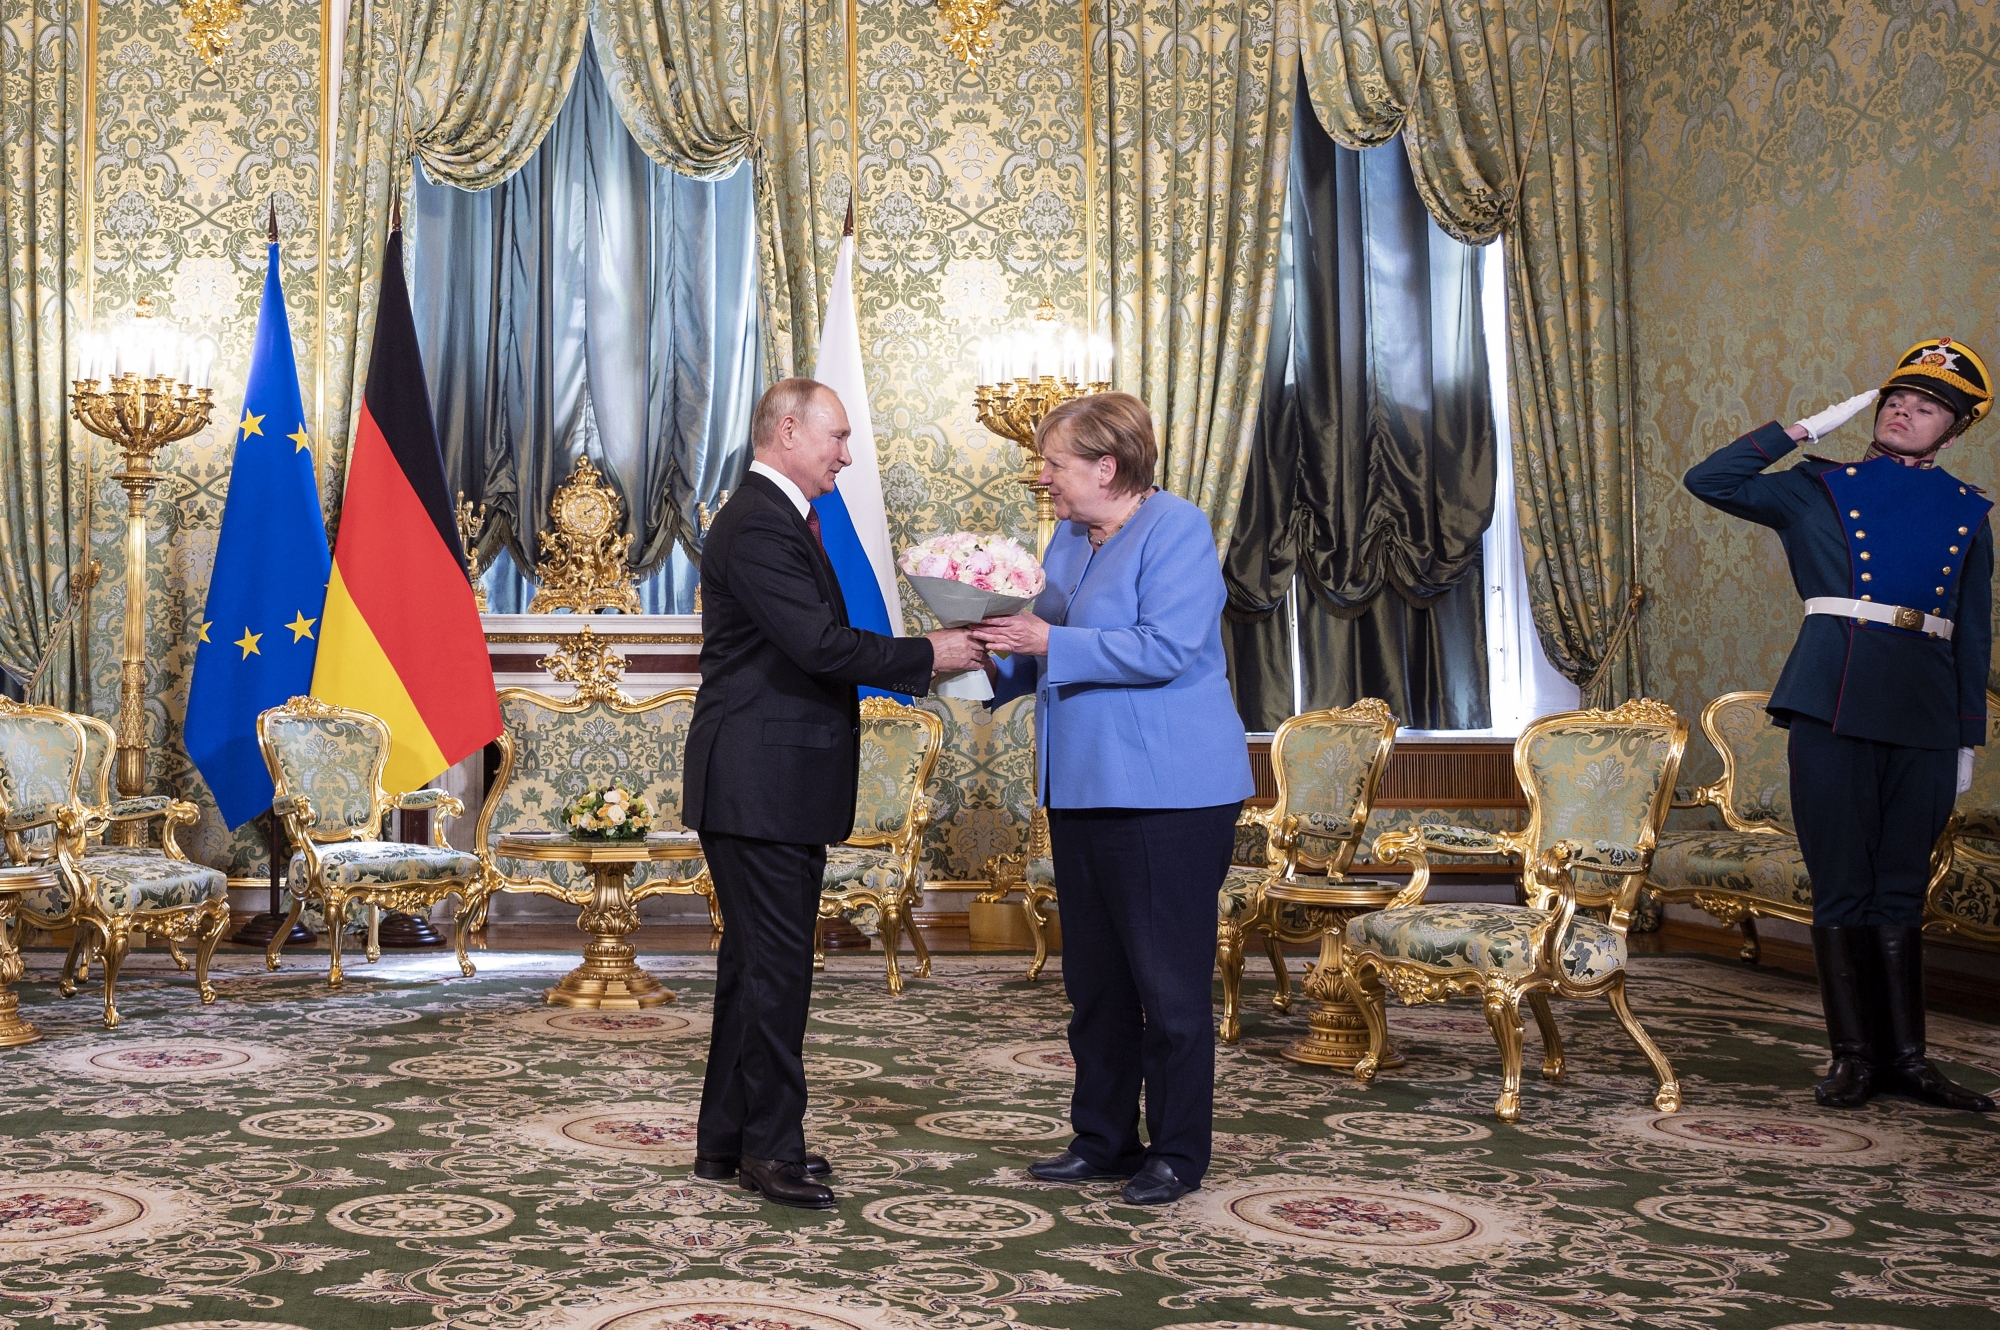 epa09421821 A handout photo made available by the Germn Government Press Office shows German Chancellor Angela Merkel meeting Russian President Vladimir Putin at the Kremlin in Moscow, Russia, 20 August 2021. The talks between Merkel and Putin are expected to focus on Afghanistan, the Ukrainian crisis and the situation in Belarus among other issues. EPA/Guido Bergmann HANDOUT HANDOUT EDITORIAL USE ONLY/NO SALES